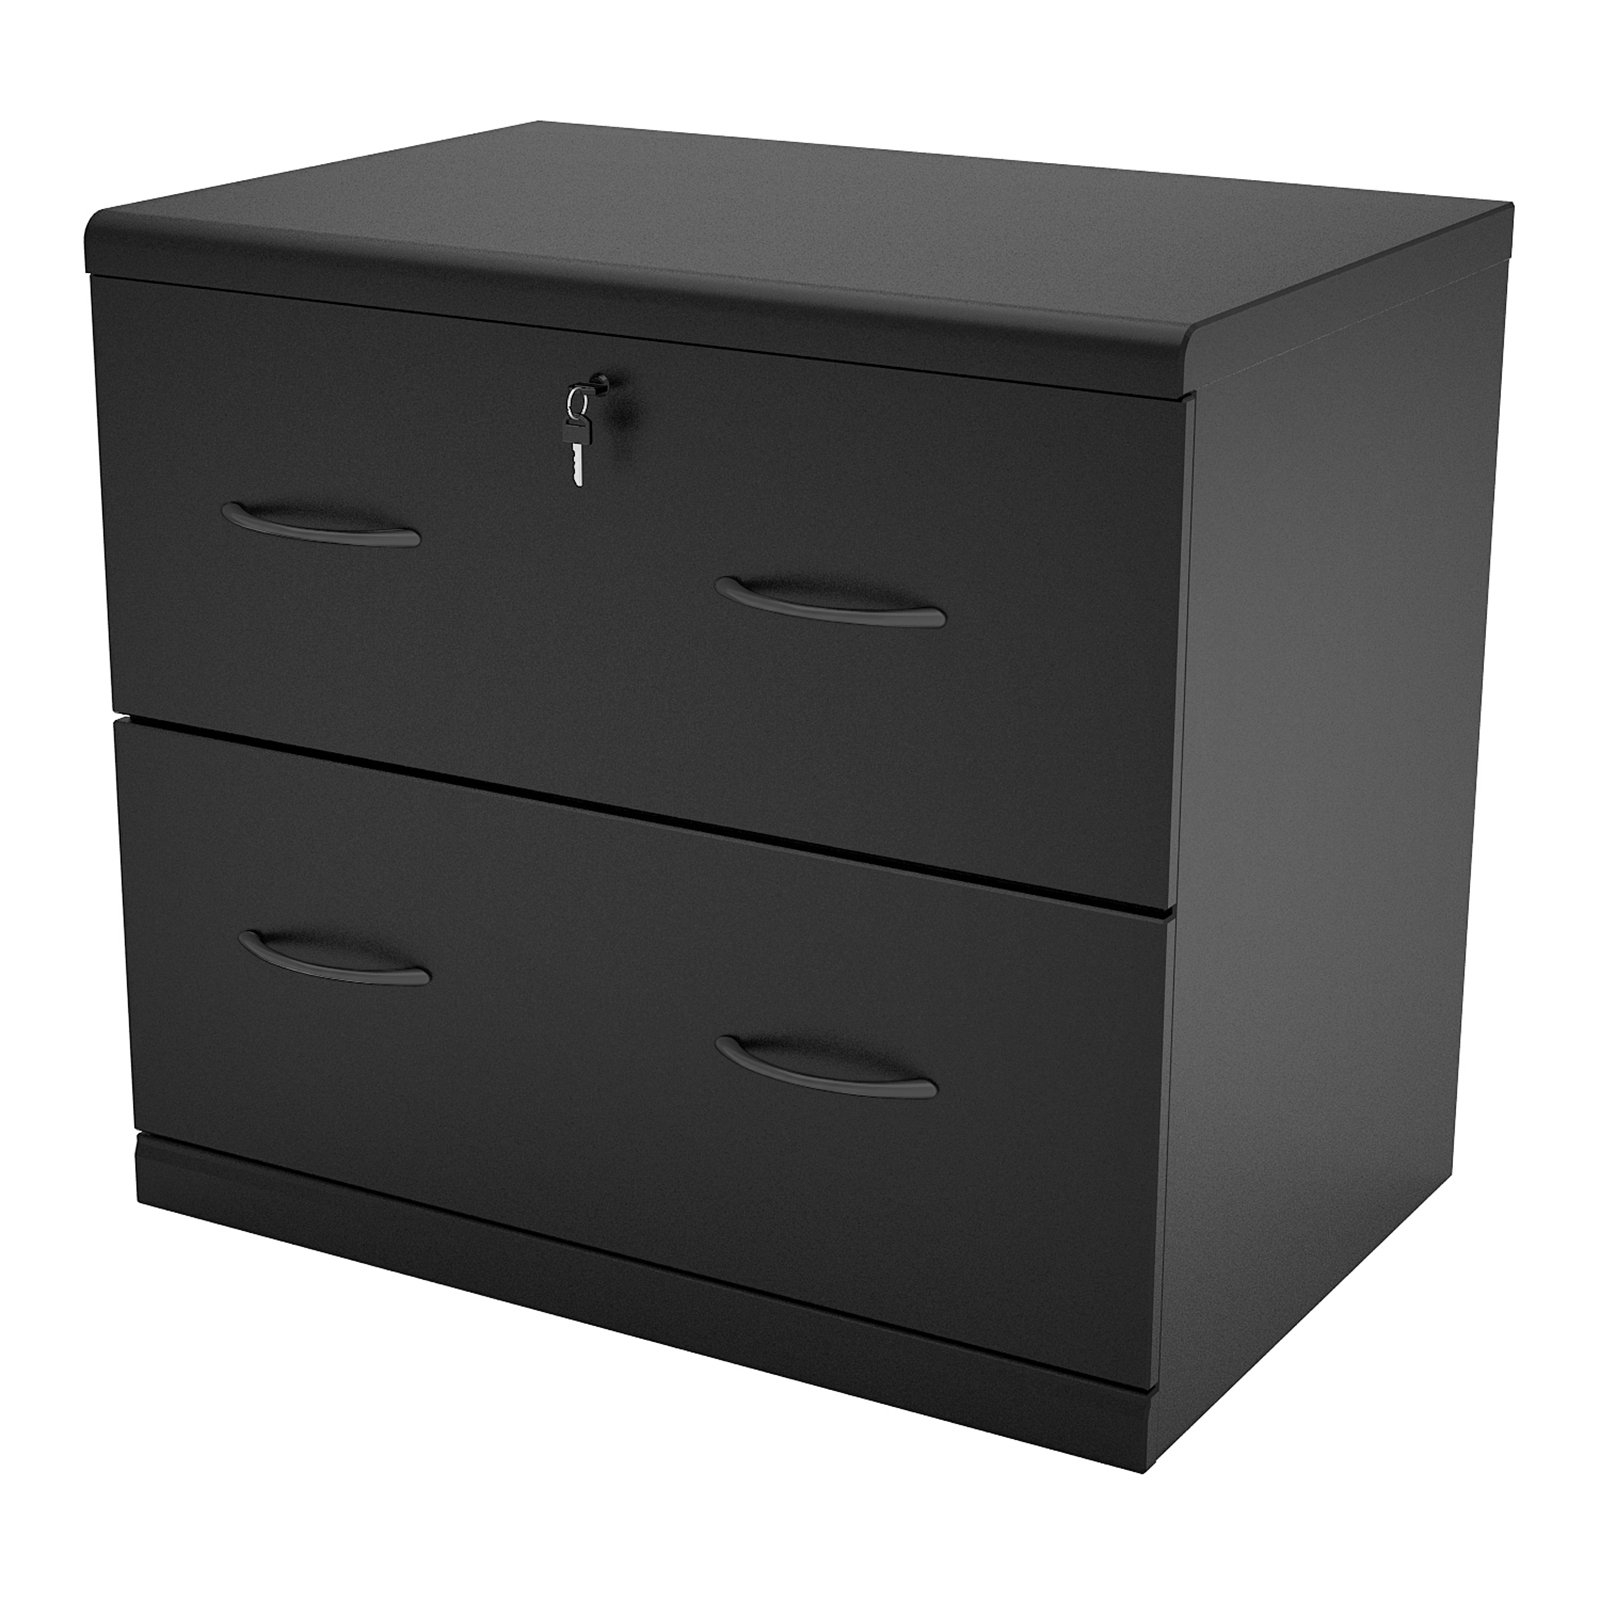 2 Drawer Lateral Wood Lockable Filing Cabinet Black Walmart intended for size 1600 X 1600